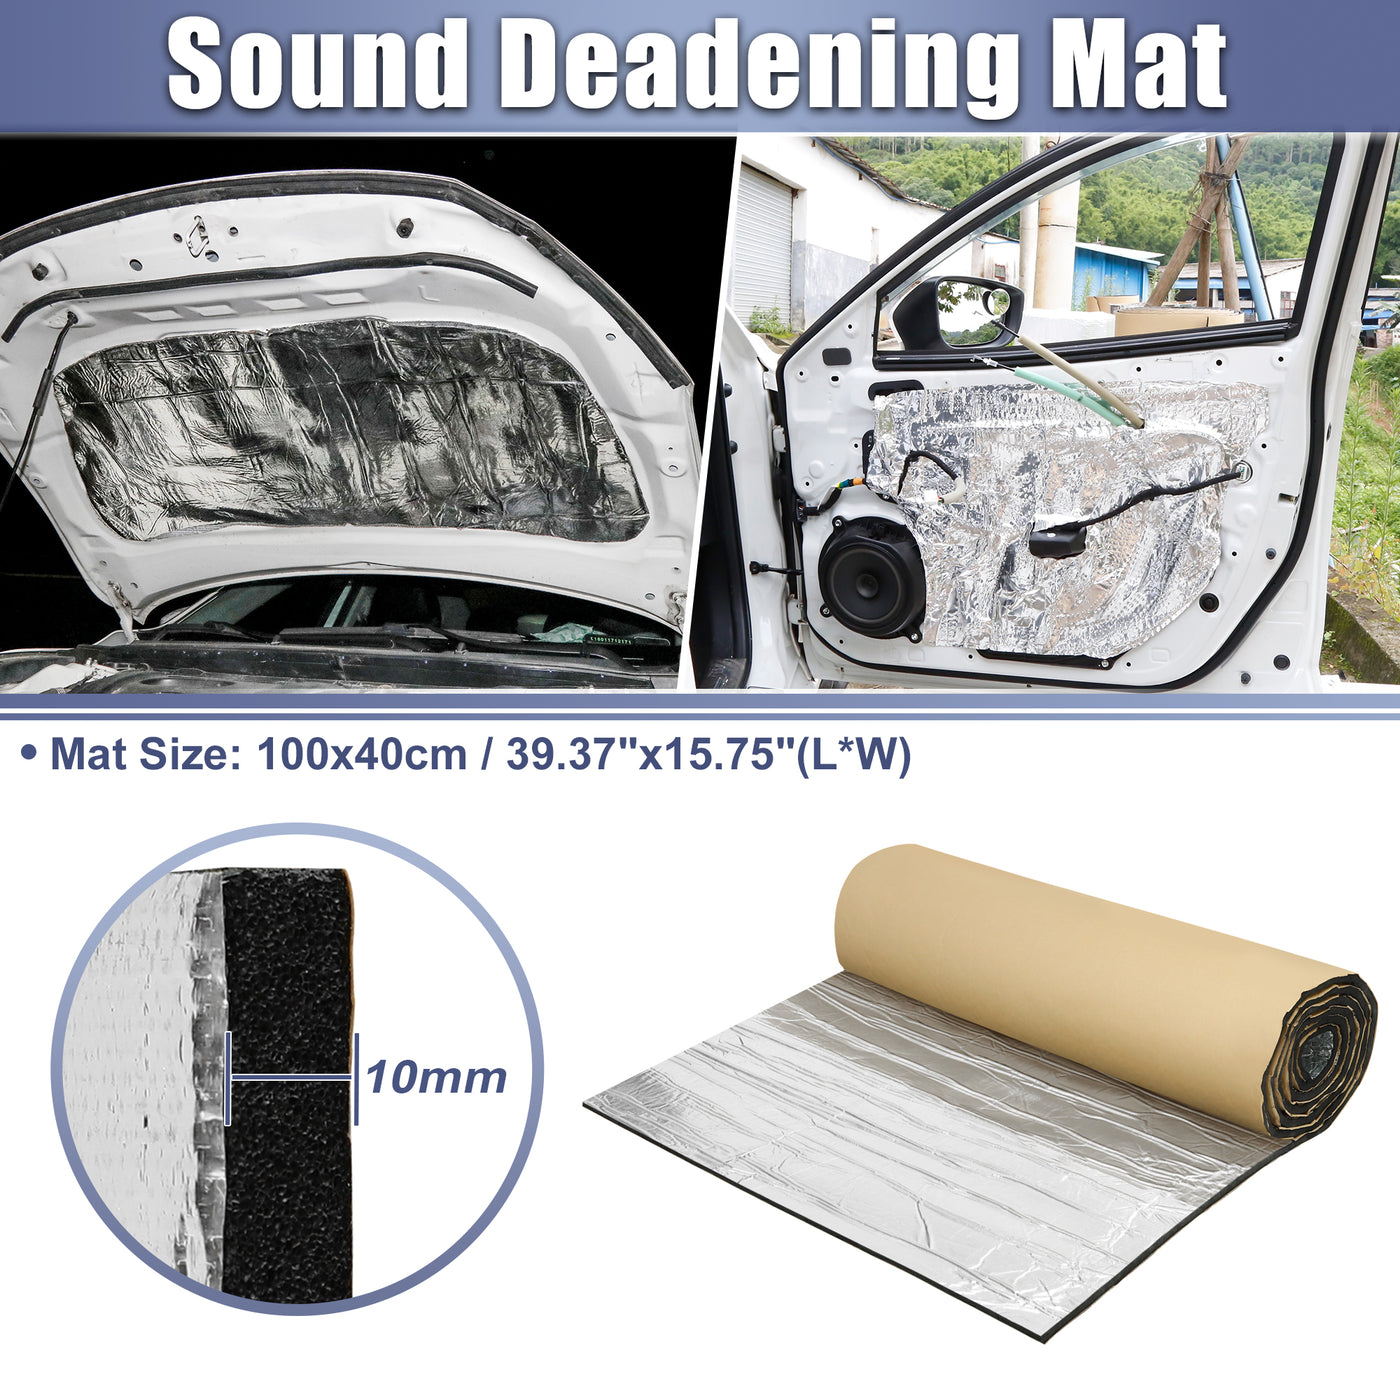 X AUTOHAUX 394mil 10mm 4.31sqft Car Sound Deadening Mat Glassfiber Closed Cell Foam Heat Shield Material Damping Self Adhesive Universal for Hood Fender and Boat Engine Cover 39.37"x15.75"